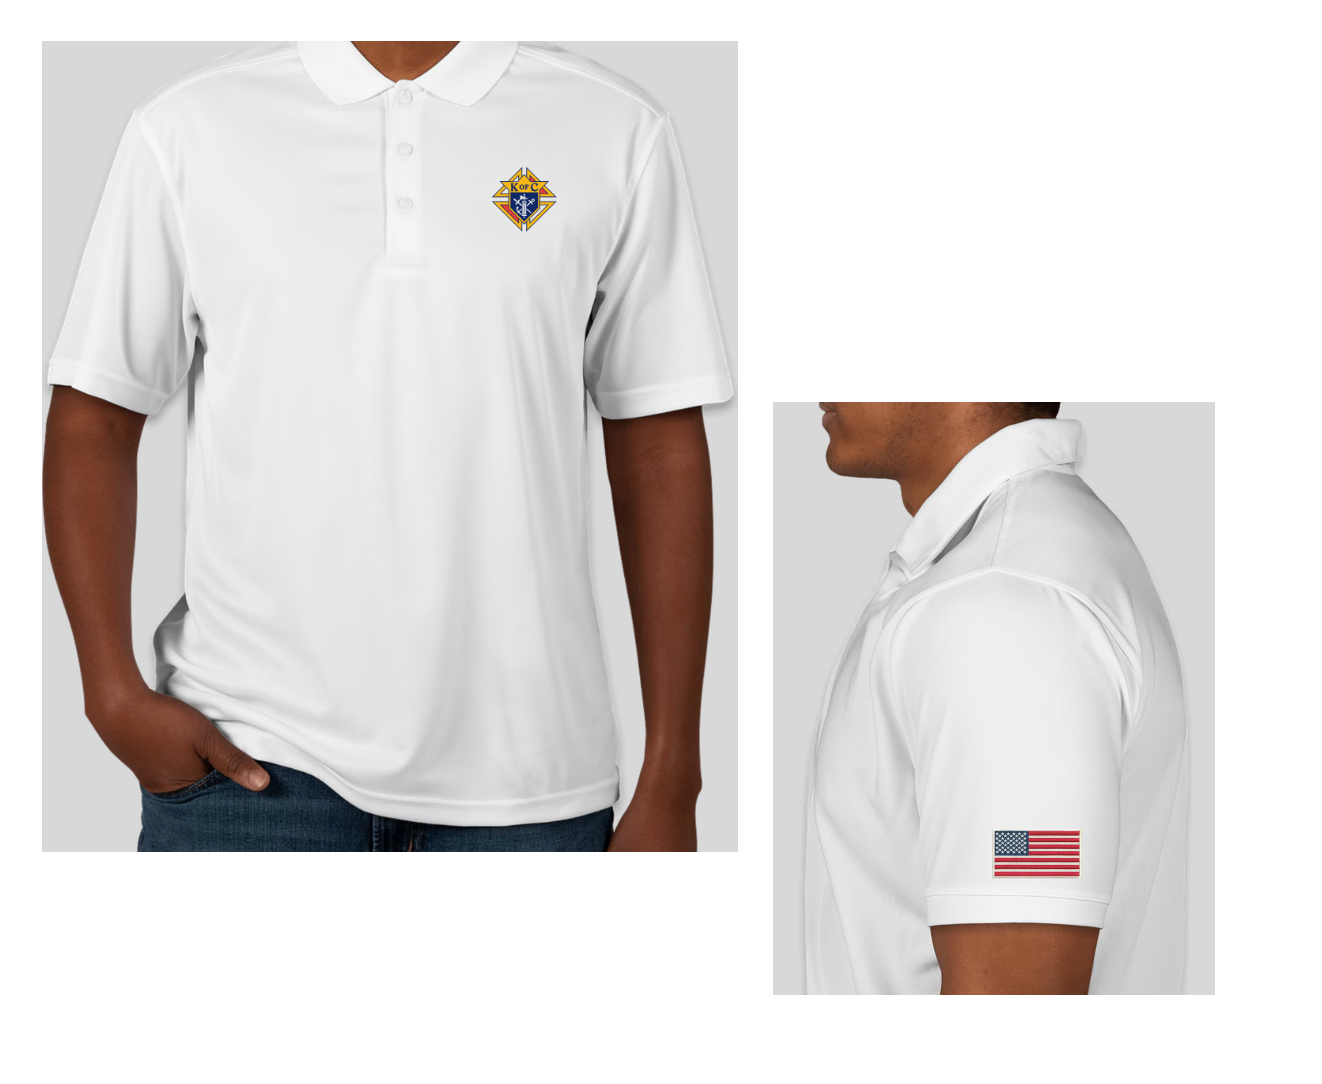 LIMITED EDITION! Clique Spin Polo - Full Color Emblem + USA Flag